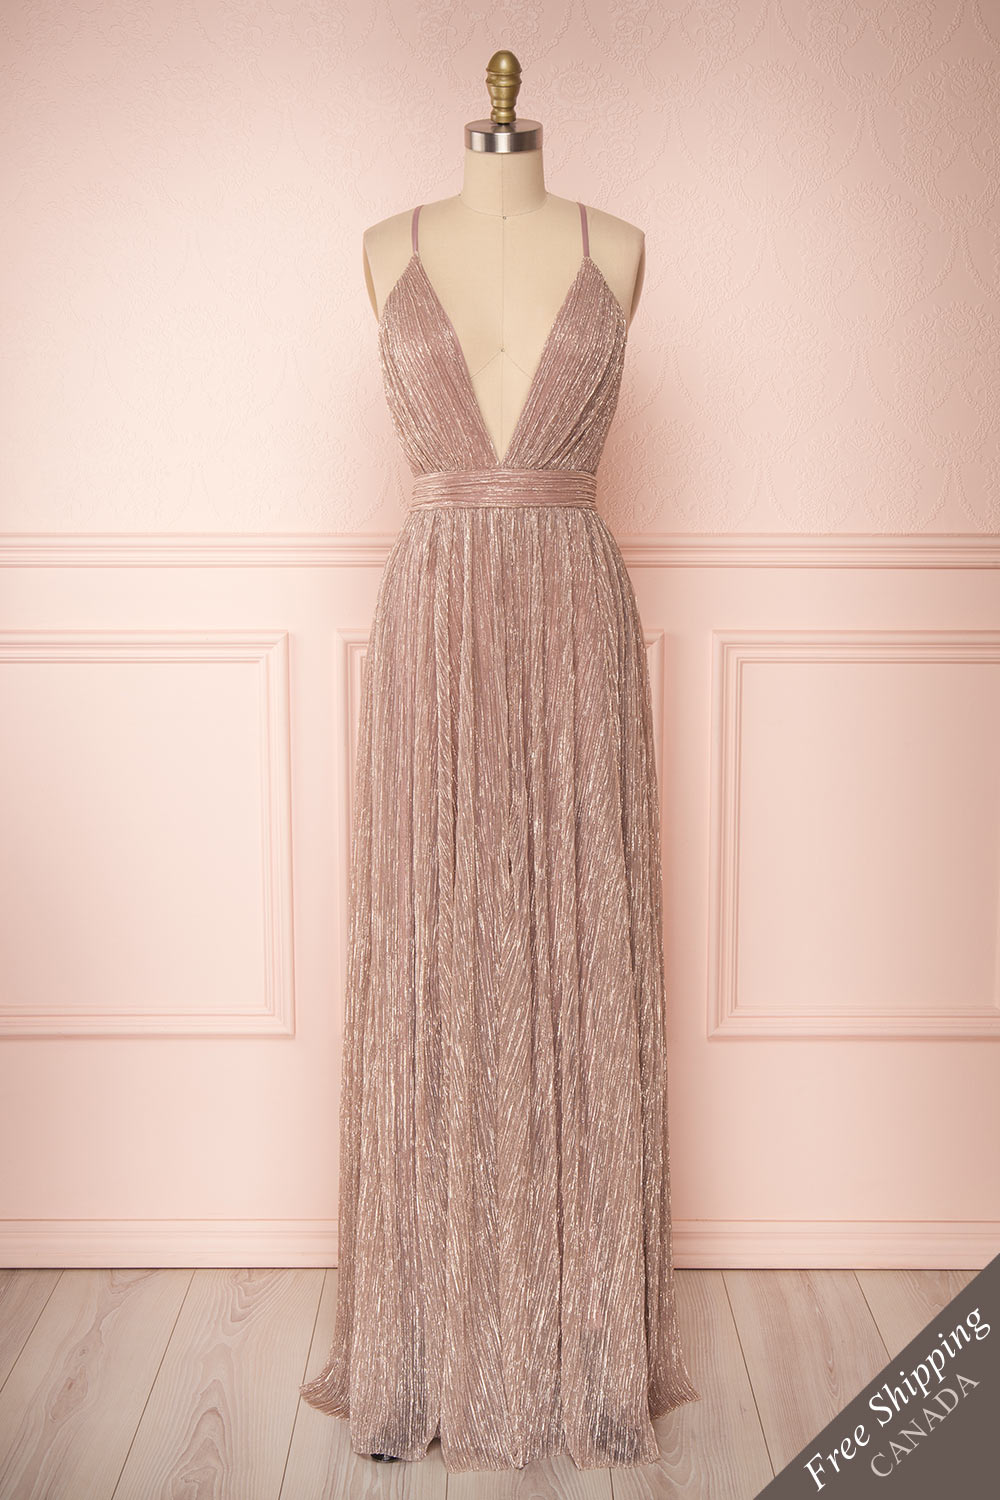 Noella Lepidolite Lilac Gown with Plunging Neckline | Boutique 1861 front view 